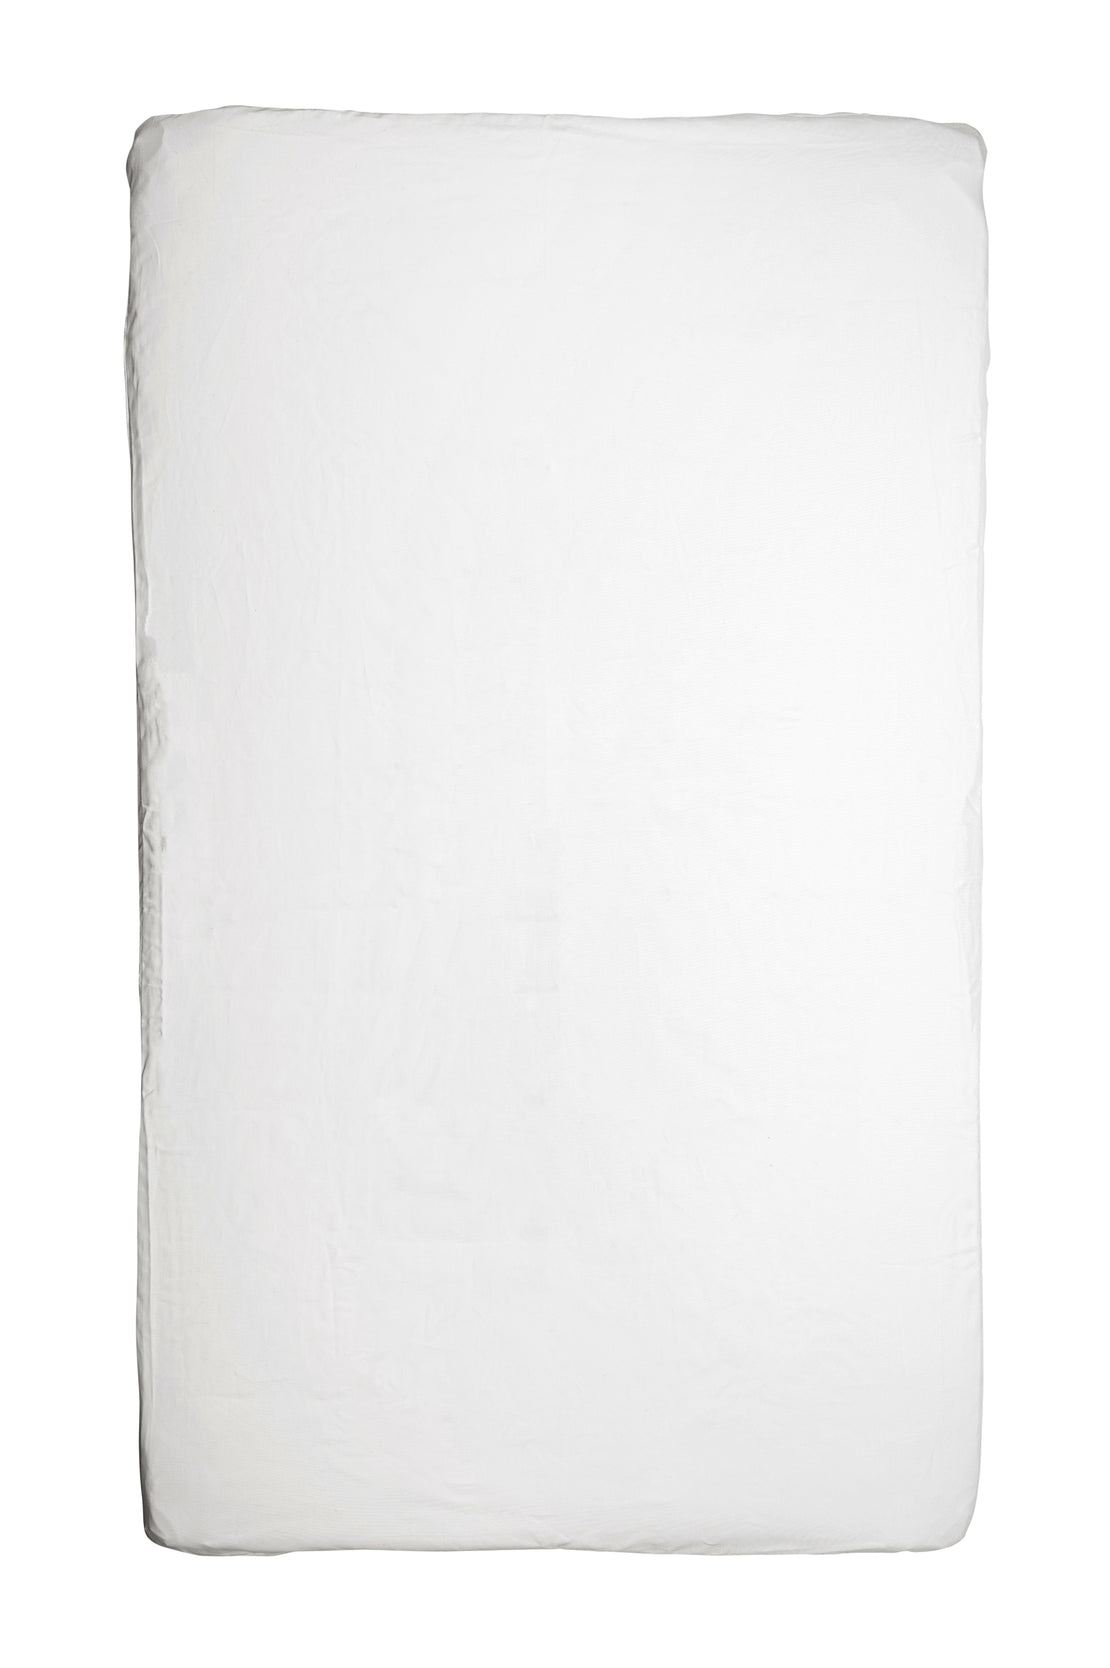 A single, thick, square white pillow isolated on a white background. The Kind Essential Bassinet Fitted Sheet in White from DockATot, crafted from safe bassinet fabric, appears soft and fluffy with a slightly irregular shape and visible stitching along the edges.